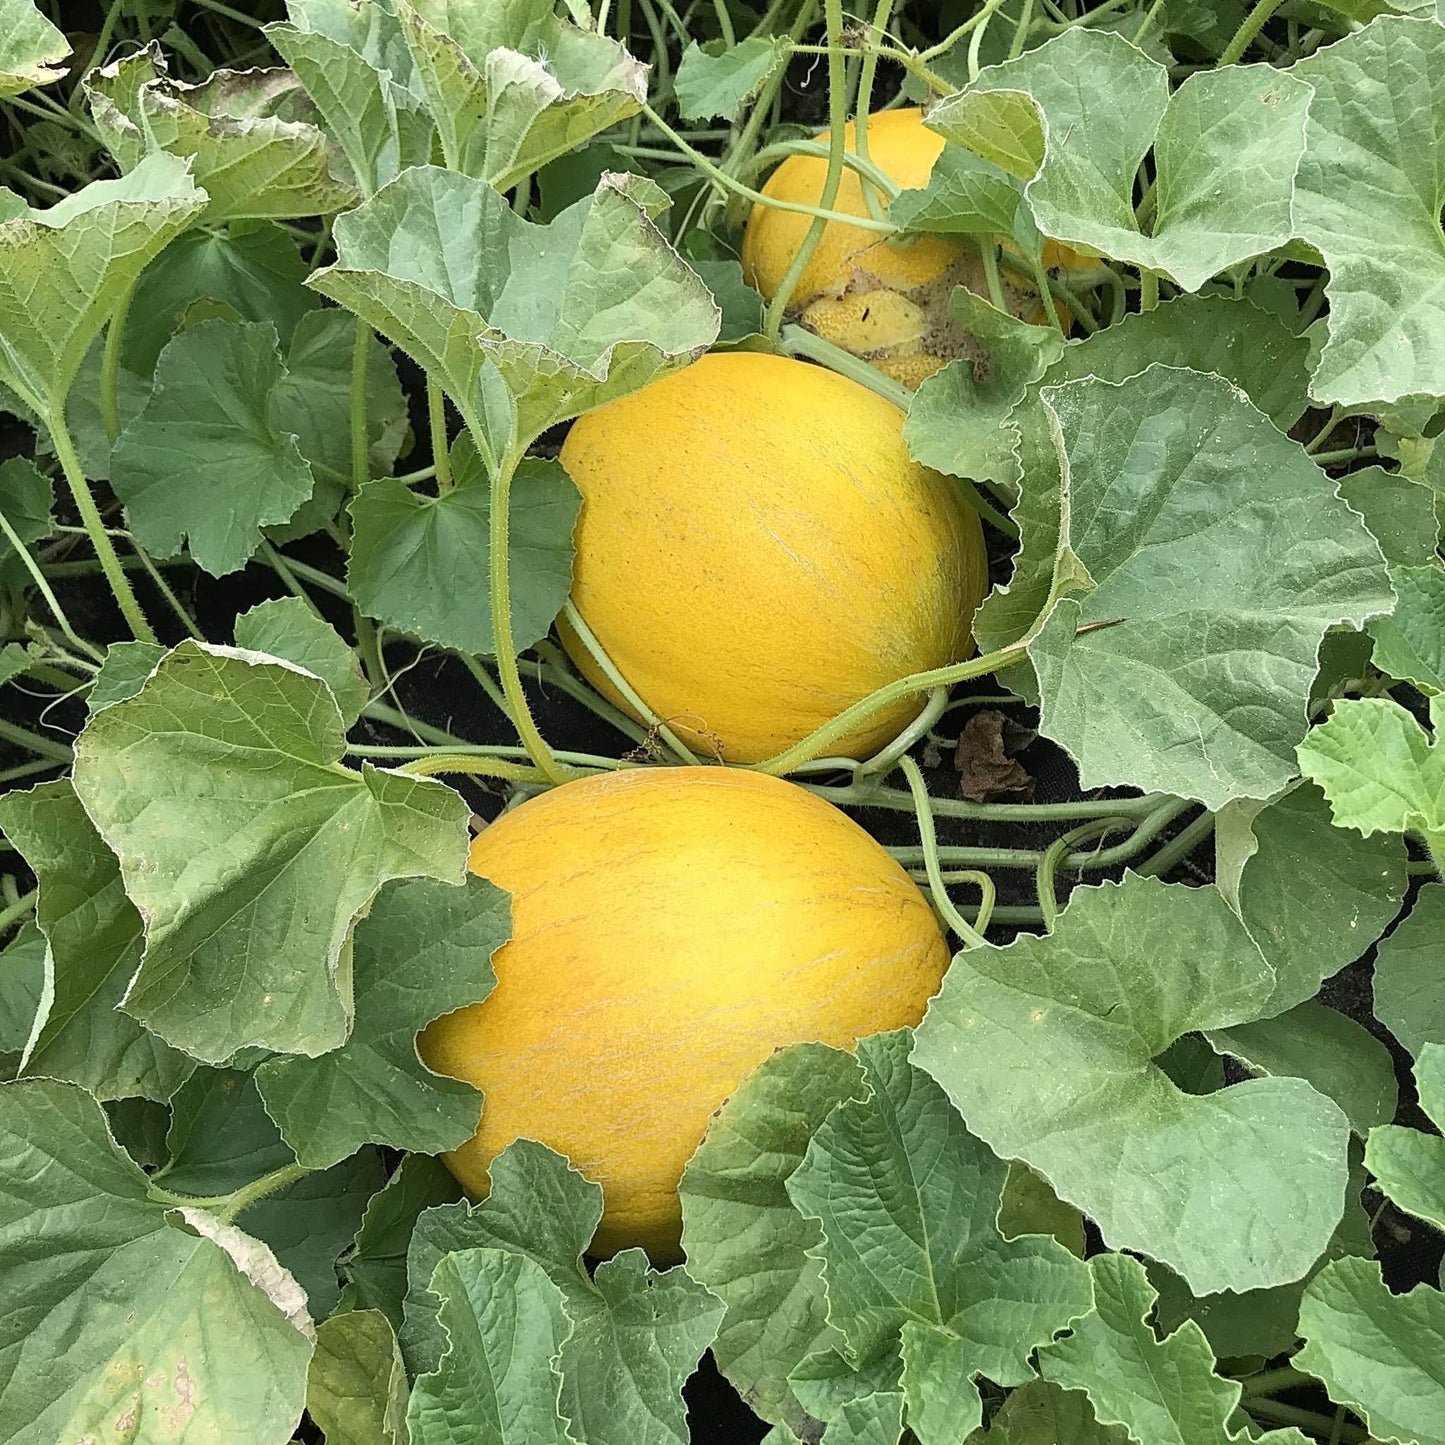 three ripe kherson market melons peeking out from beneath the leaves